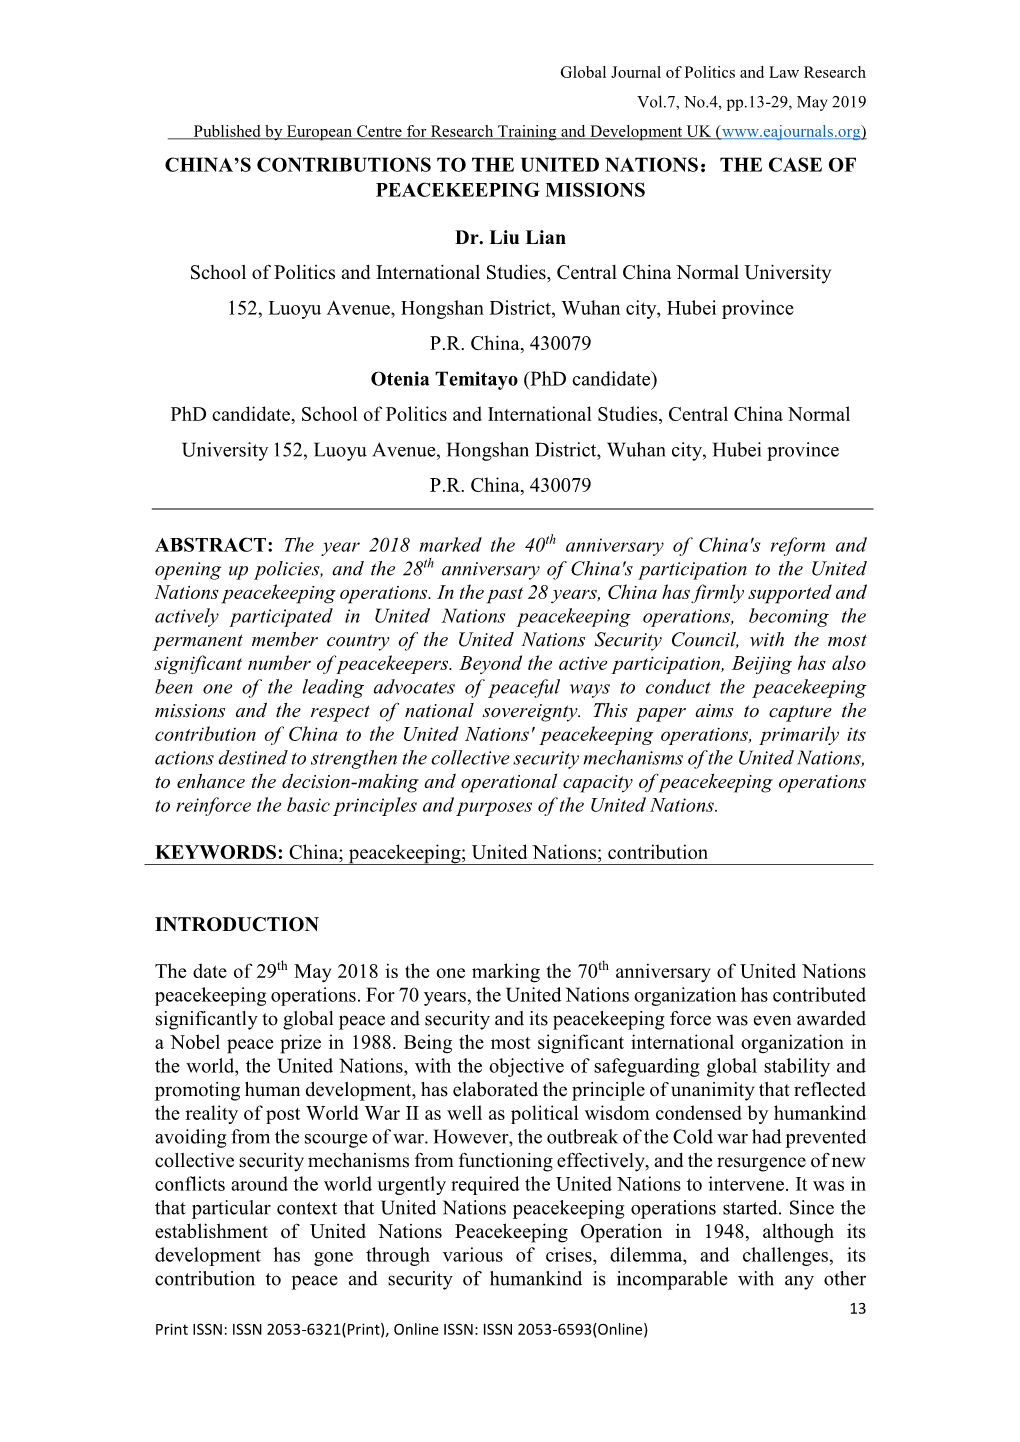 THE CASE of PEACEKEEPING MISSIONS Dr. Liu Lian School Of